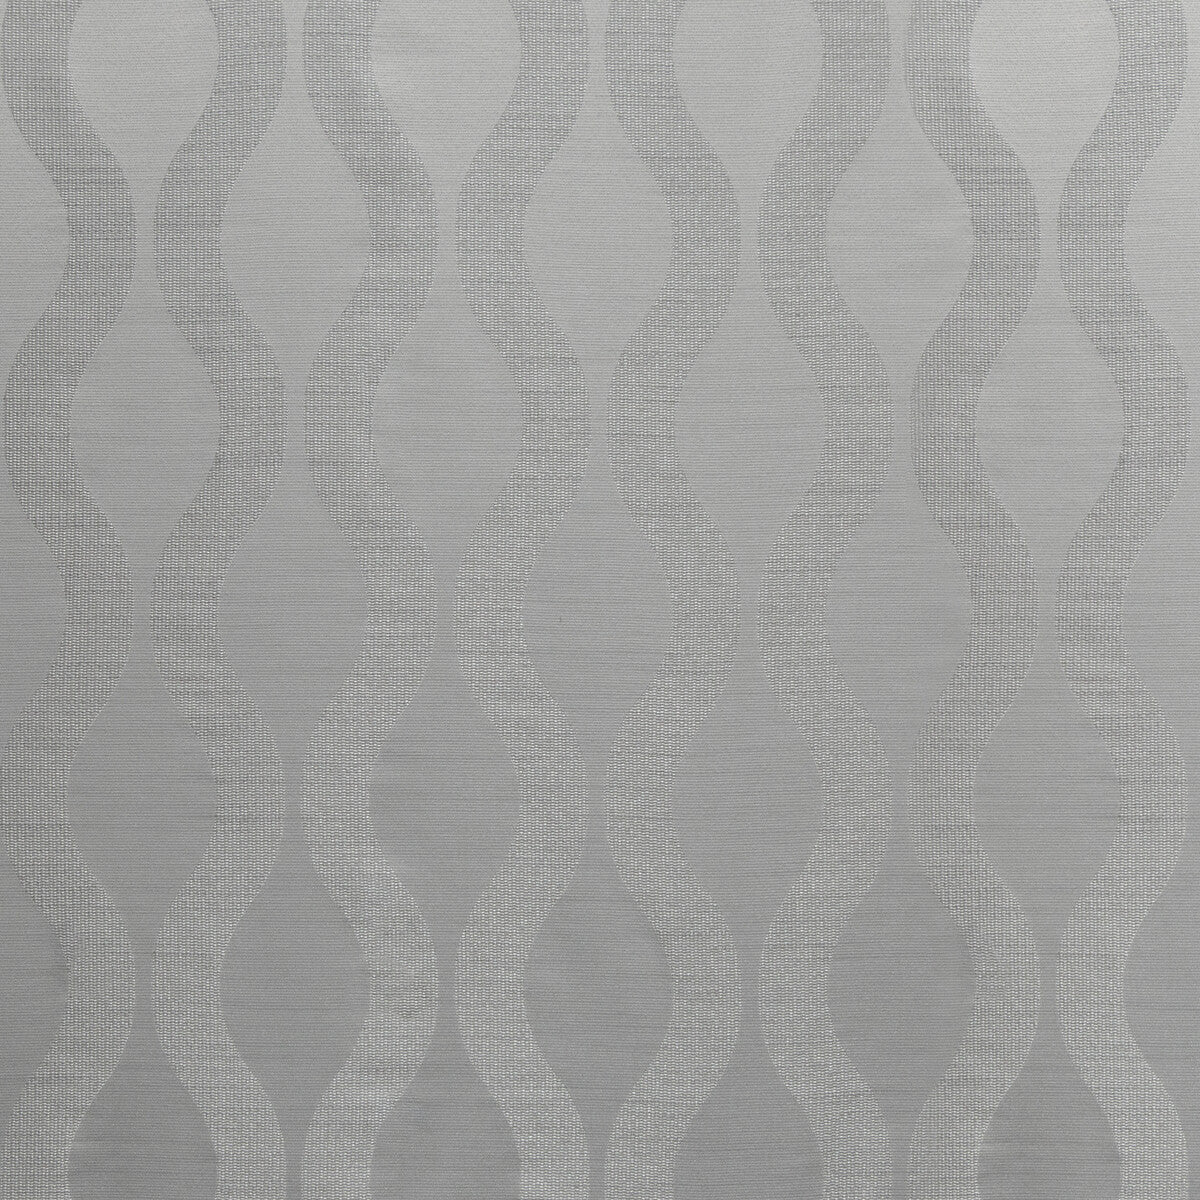 Nellie fabric in zinc color - pattern 4660.11.0 - by Kravet Contract